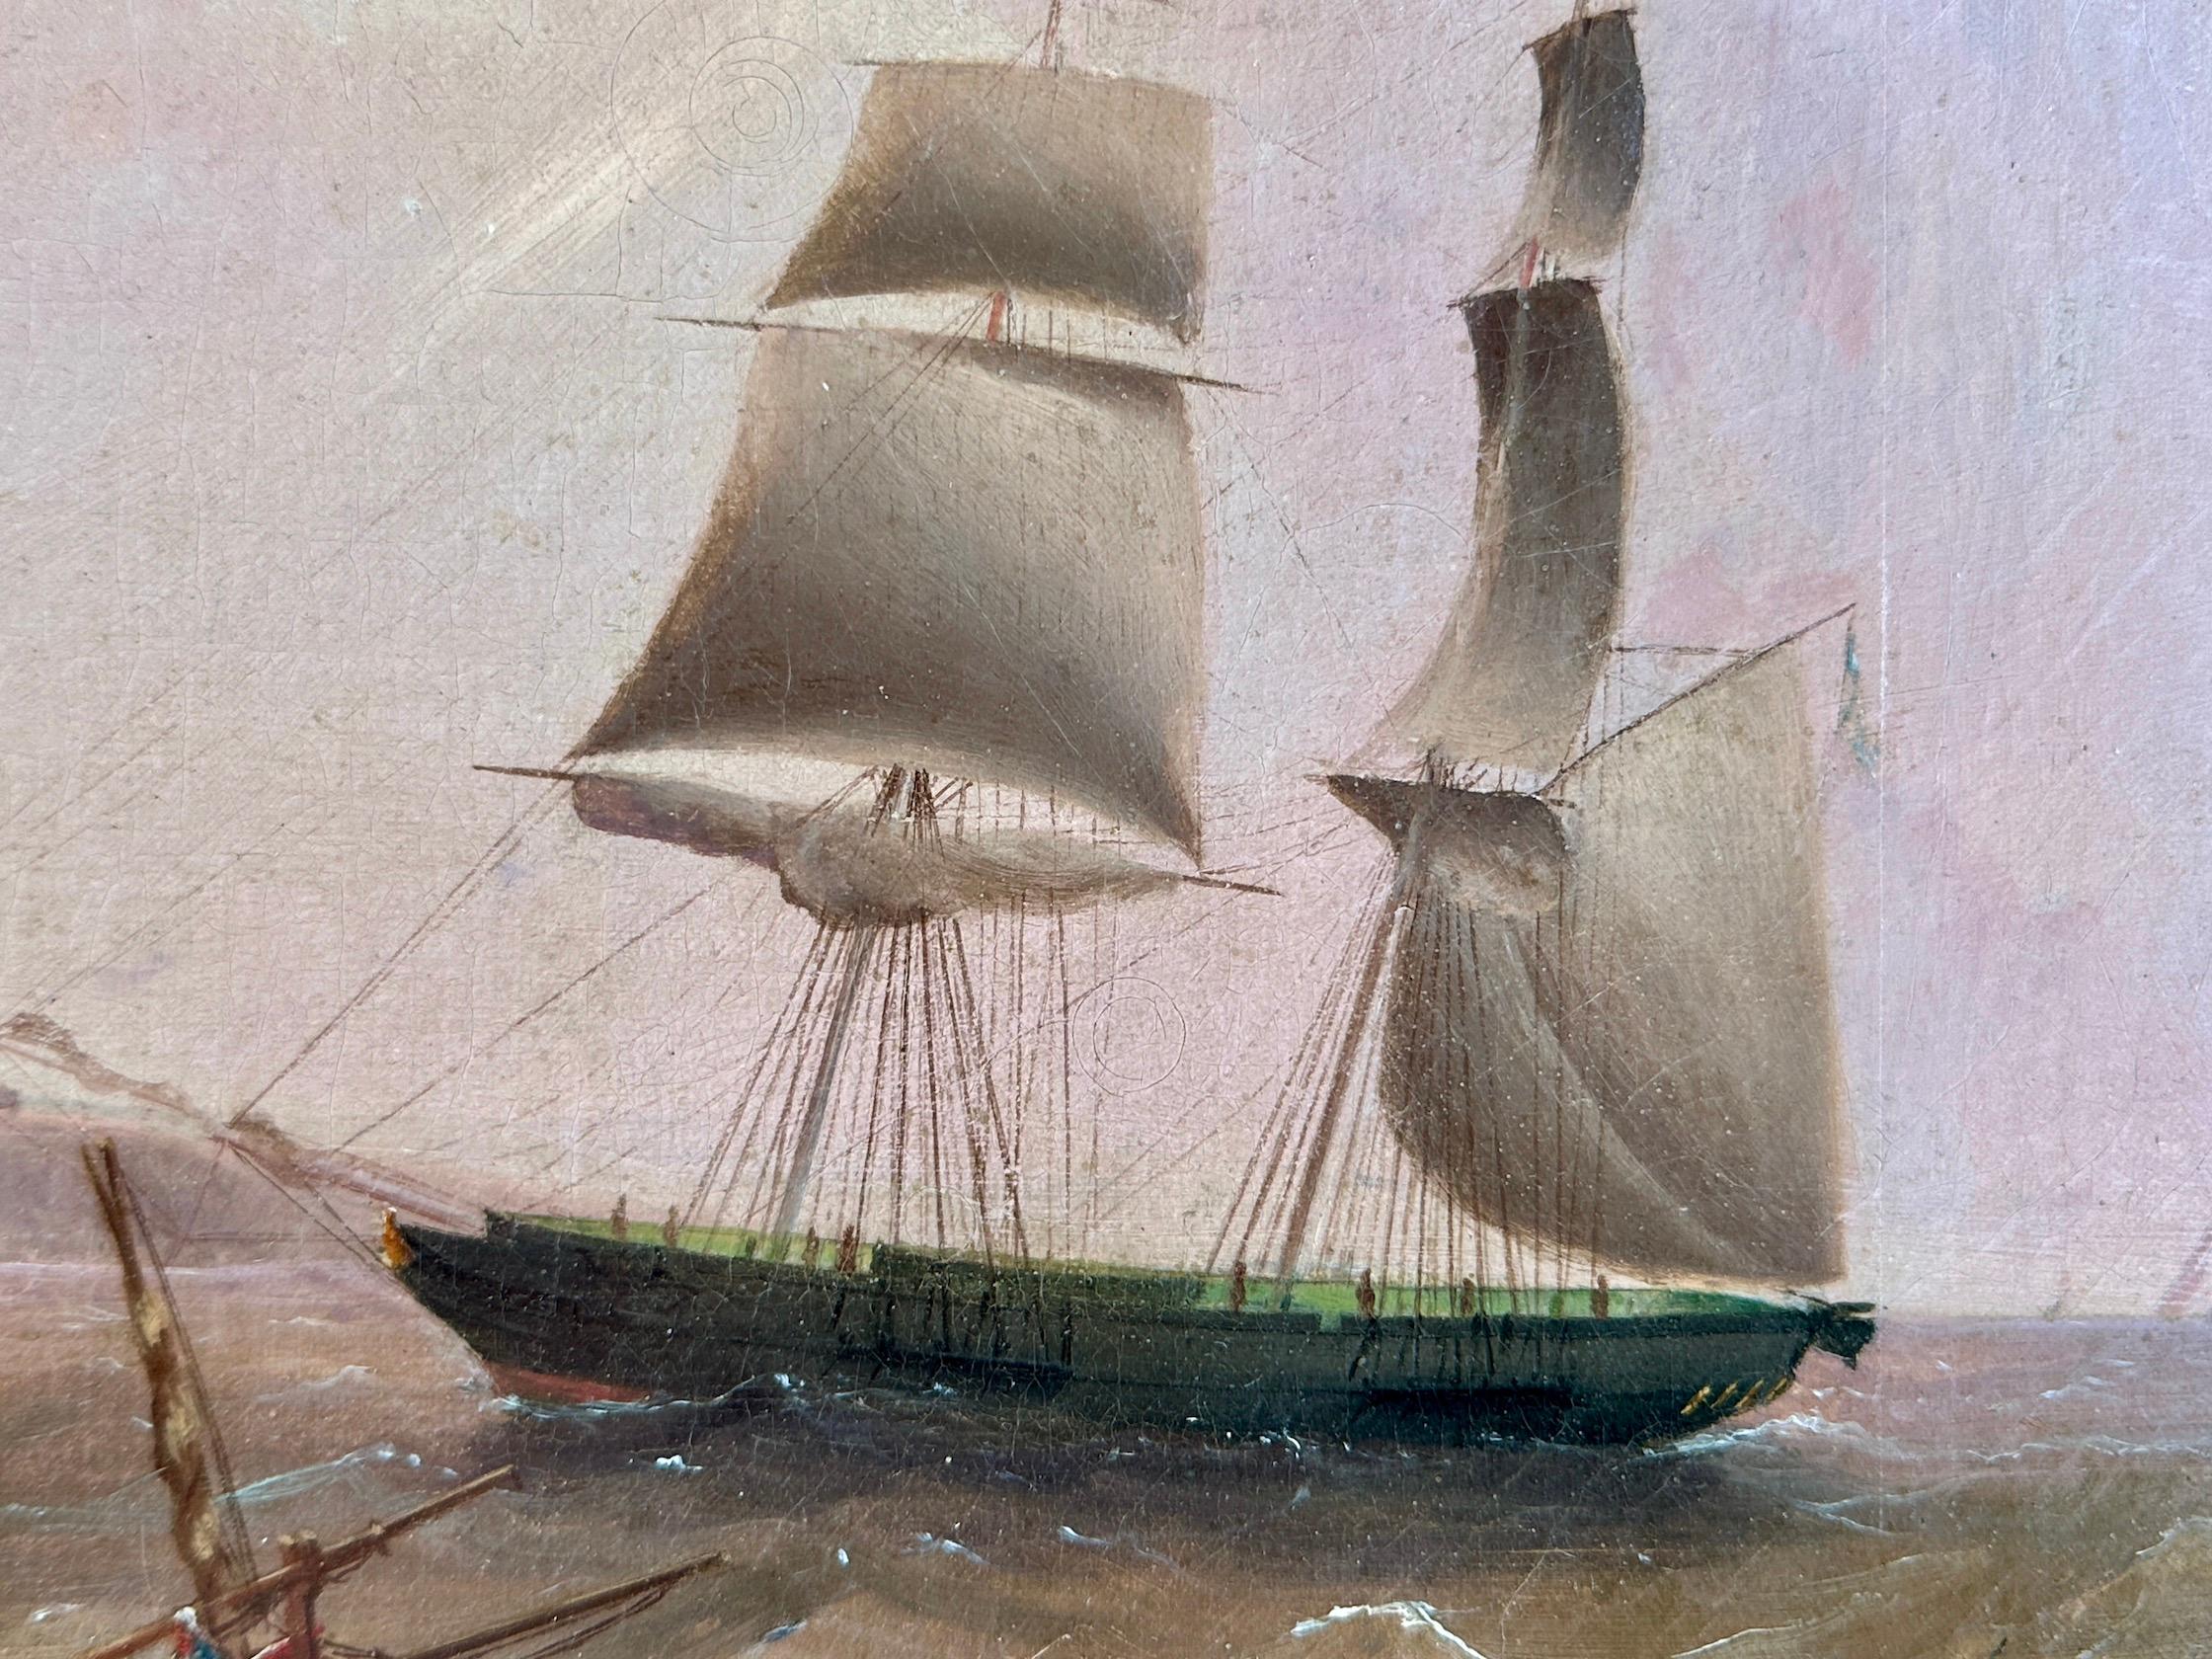 English 19th century portrait of the Clipper ship Crescent at sea in full sail For Sale 4